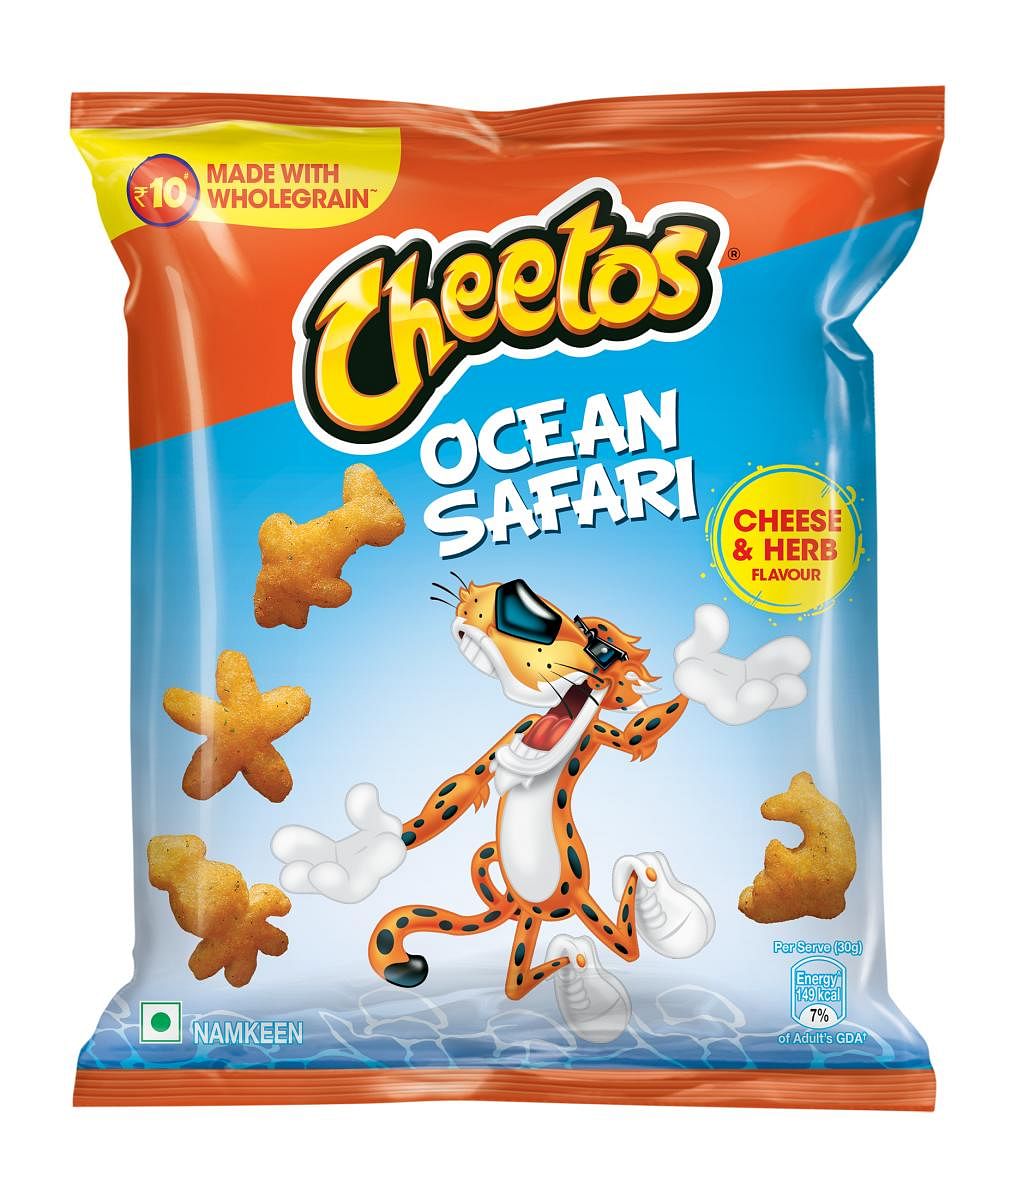 PepsiCo India launches new Cheetos Ocean Safari in line with its global nutrition guidelines.